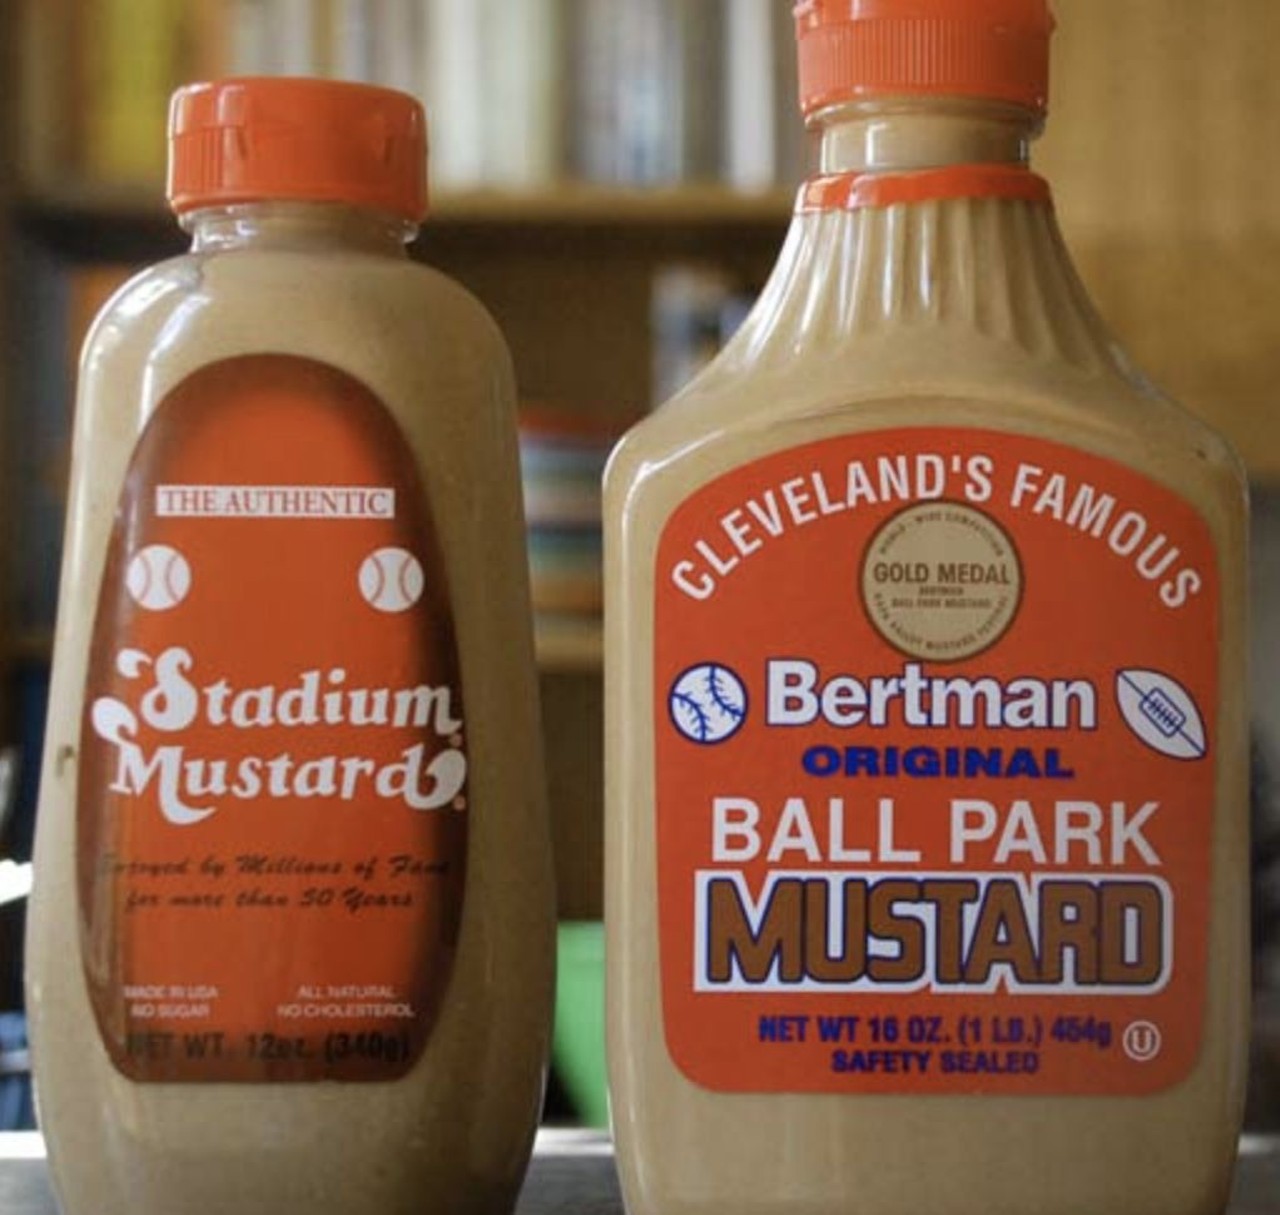 Stadium Mustard
If you have a strong opinion on Stadium Mustard vs. Ballpark Mustard, well, you&#146;re a Clevelander.
Photo via Wikimedia Commons